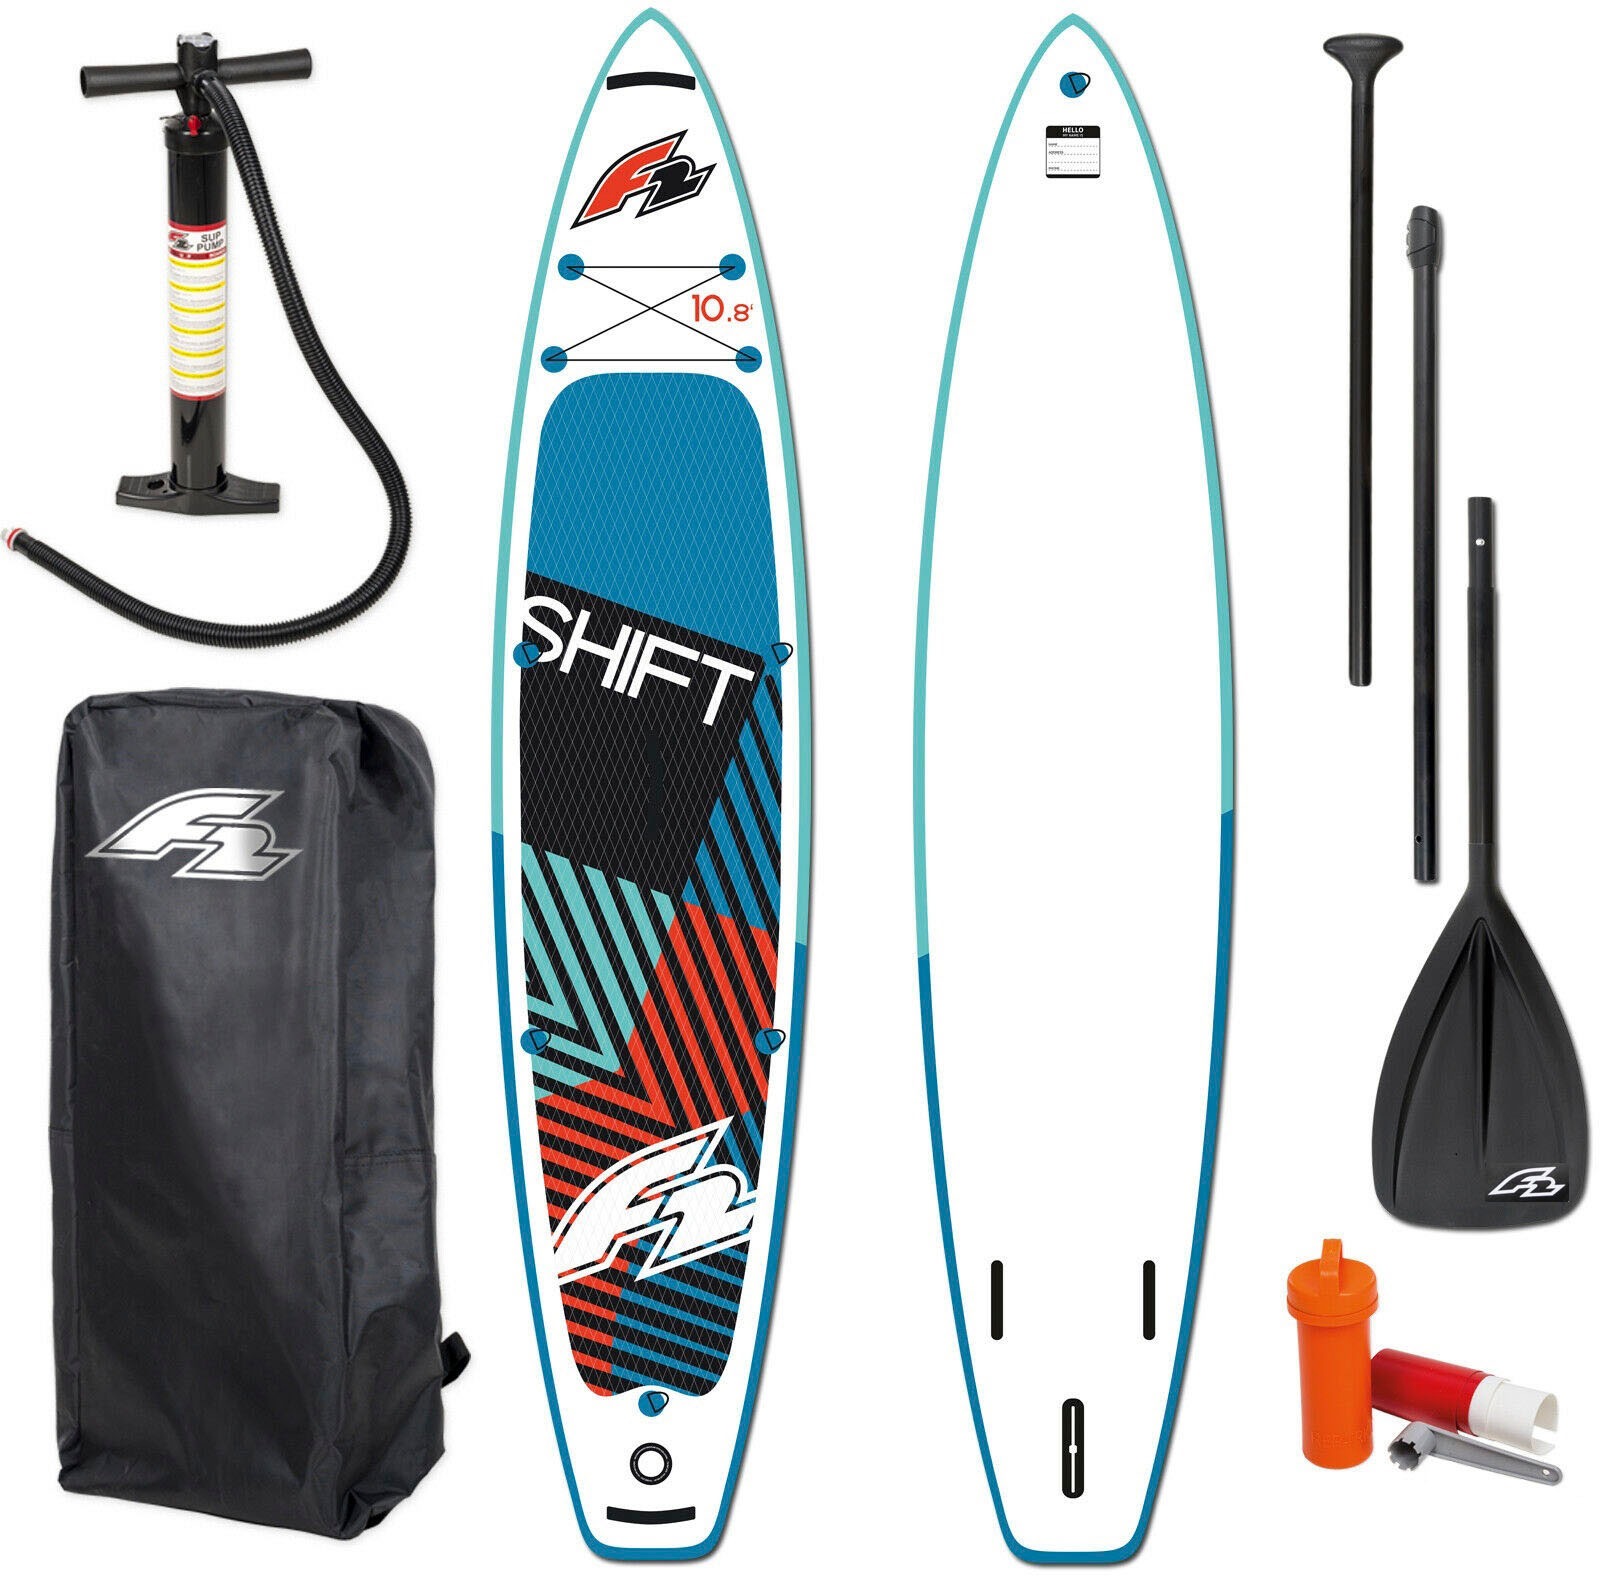 F2 Inflatable SUP-Board 5 Shop tlg.) 10,8«, im (Packung, Online »Shift OTTO